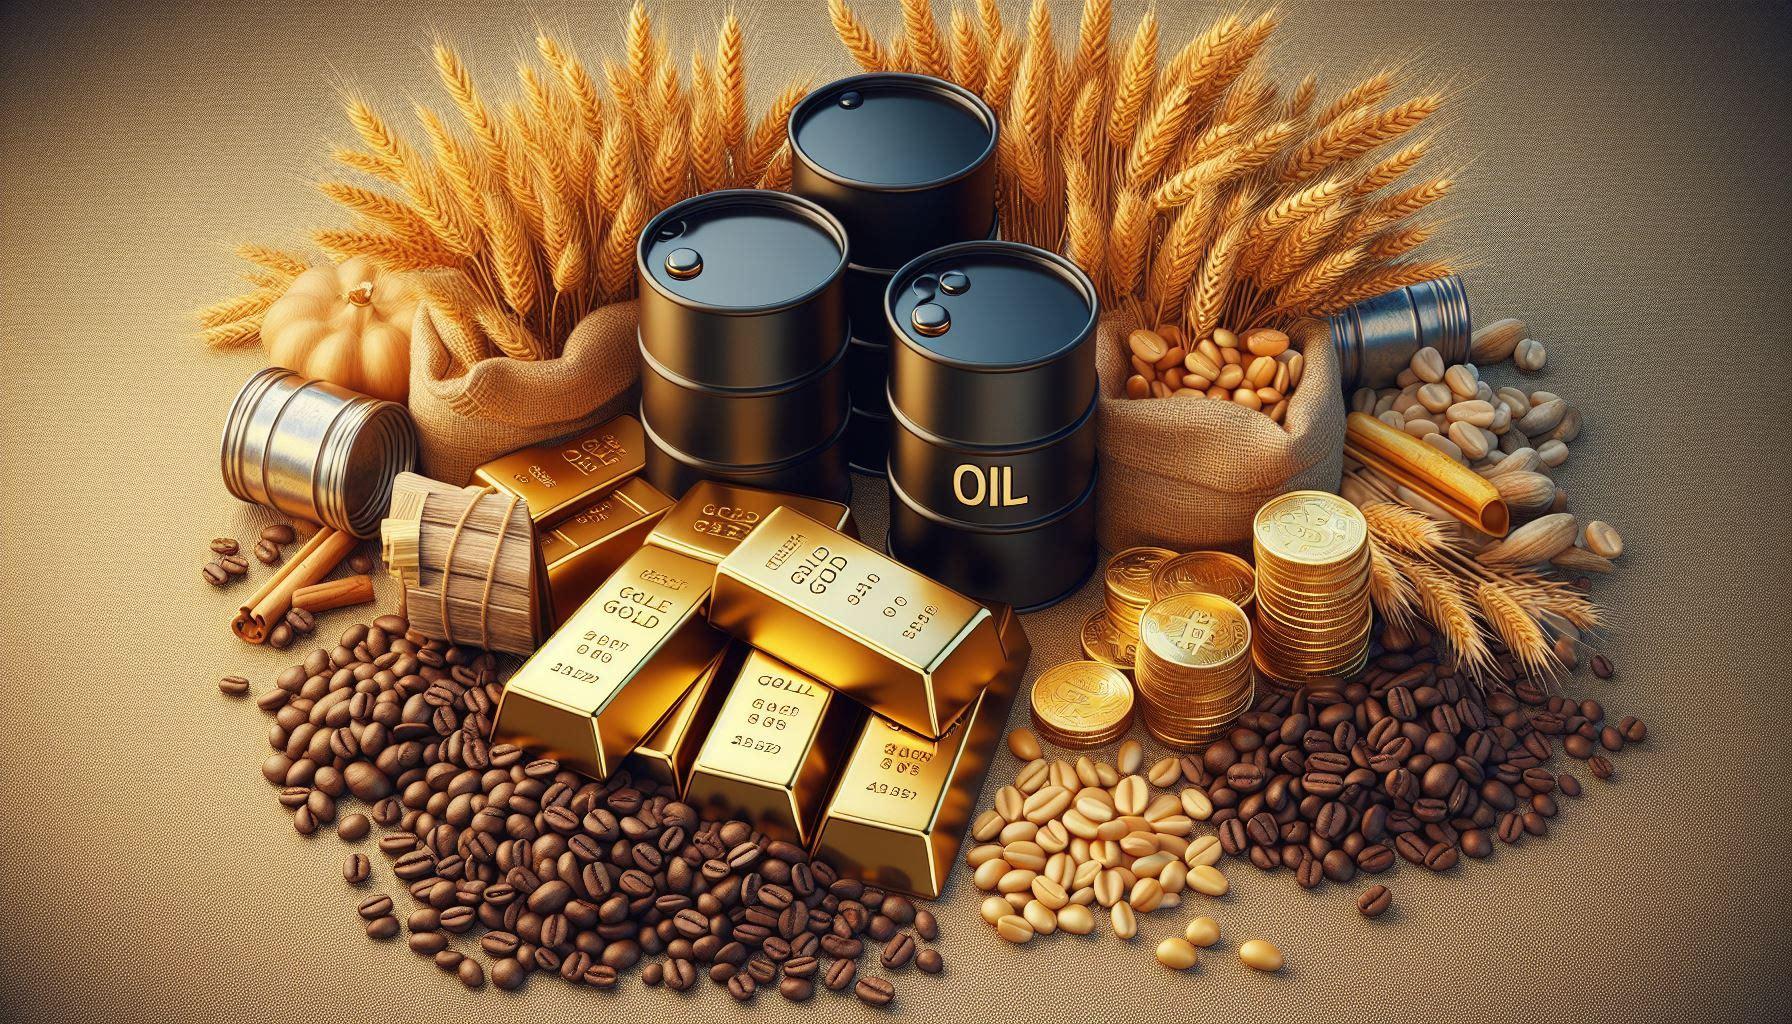 Commodity trading black barrel of crude oil, gold bullion bars, wheat and coffee seeds